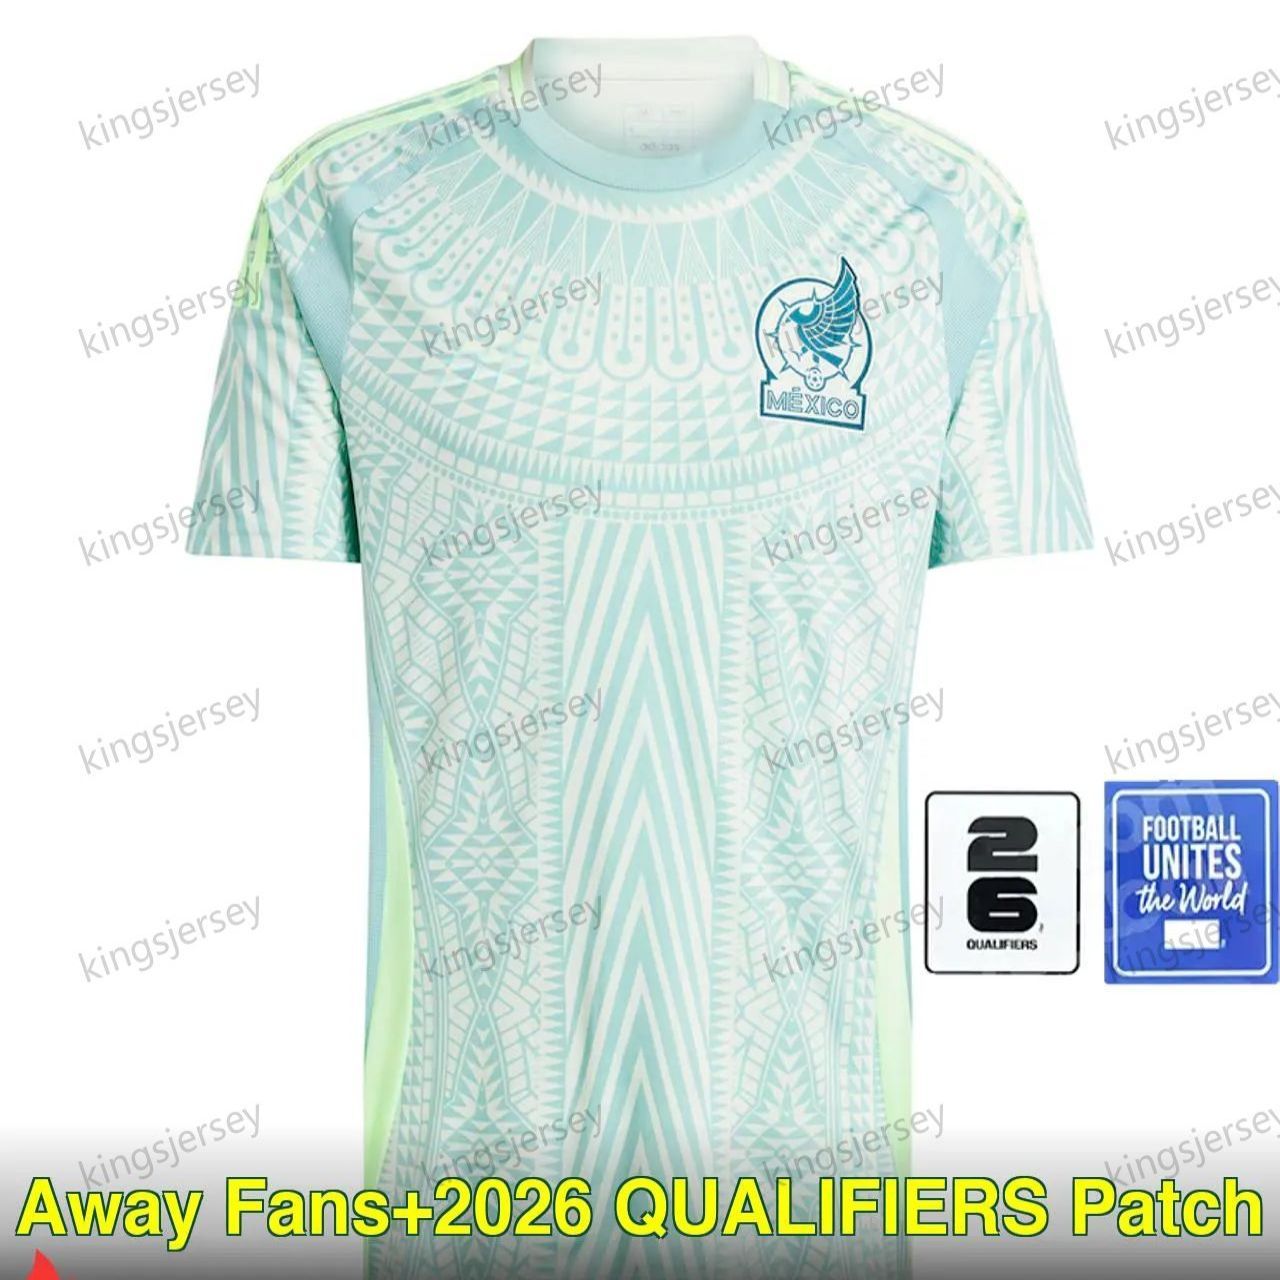 Away Fans+2026 QUALIFIERS Patch